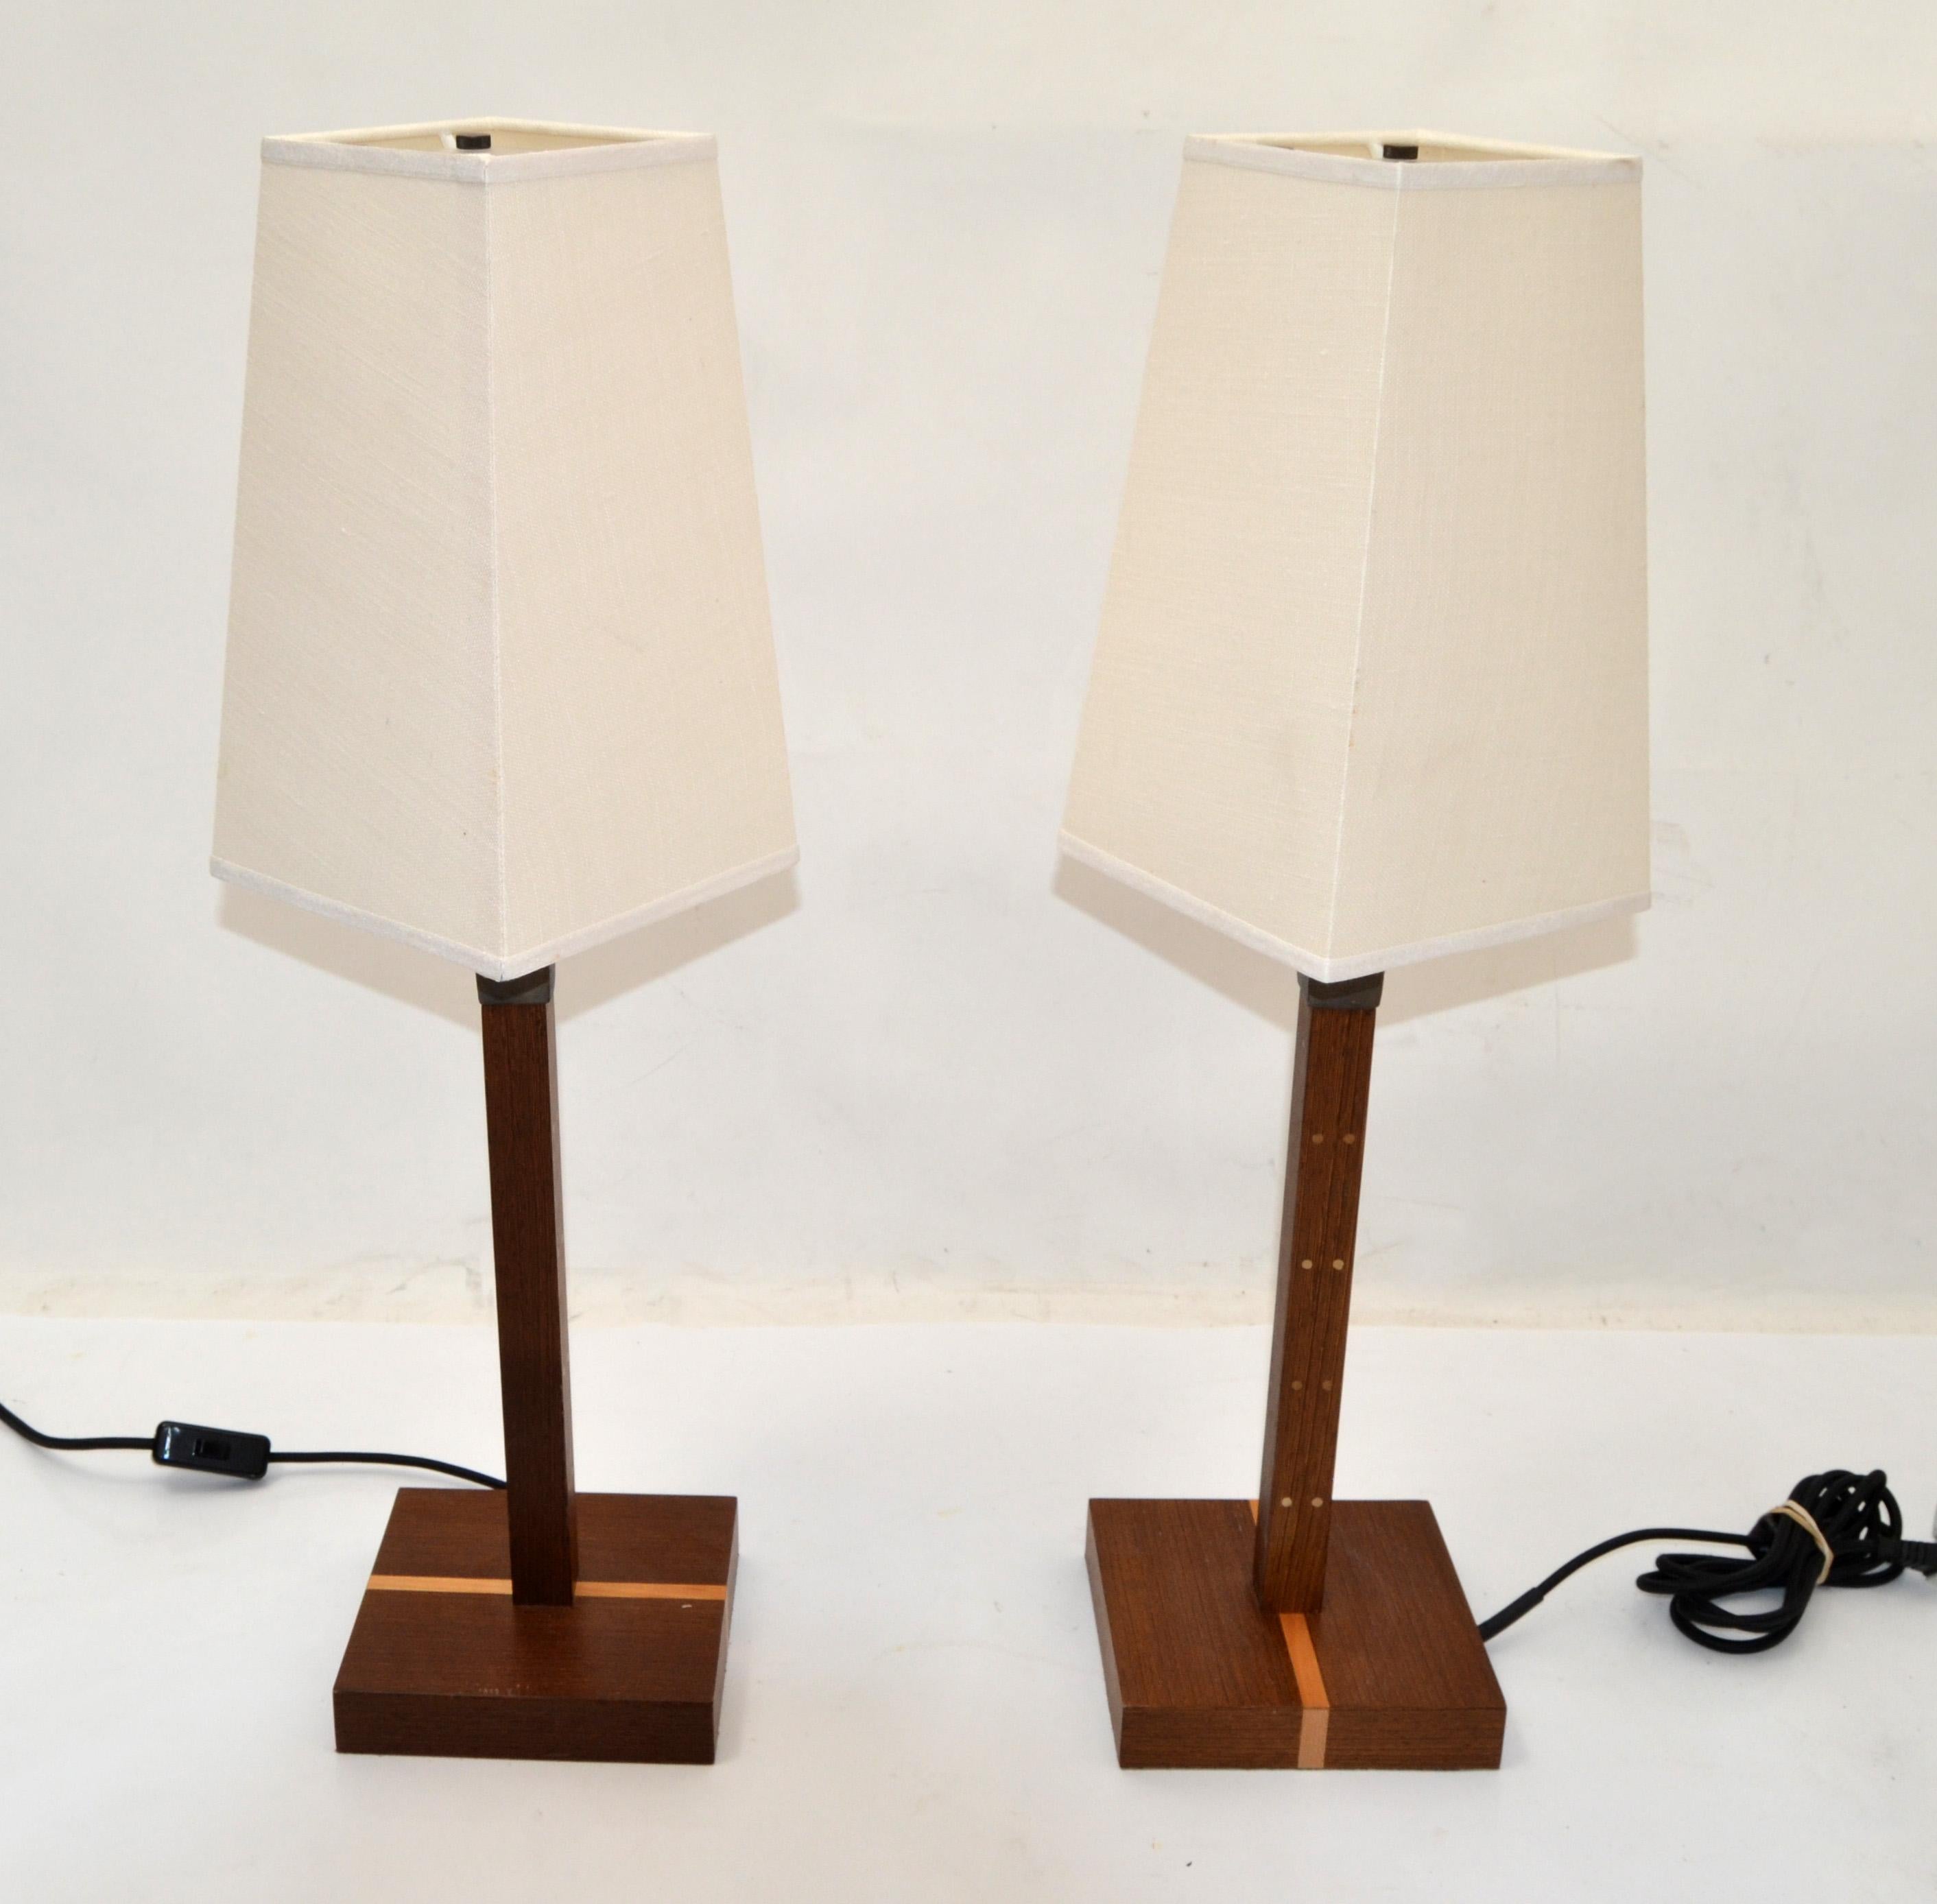 Pair, Ida lamps designed by Romeo Sozzi circa 1990 for Promemoria made in Italy.
Mid-Century Modern cool design made out of Wenge Wood, hammered Bronze, Acrylic and crowned with a Linen Shade.
US Rewiring with Cord switch, UL listed and marked at